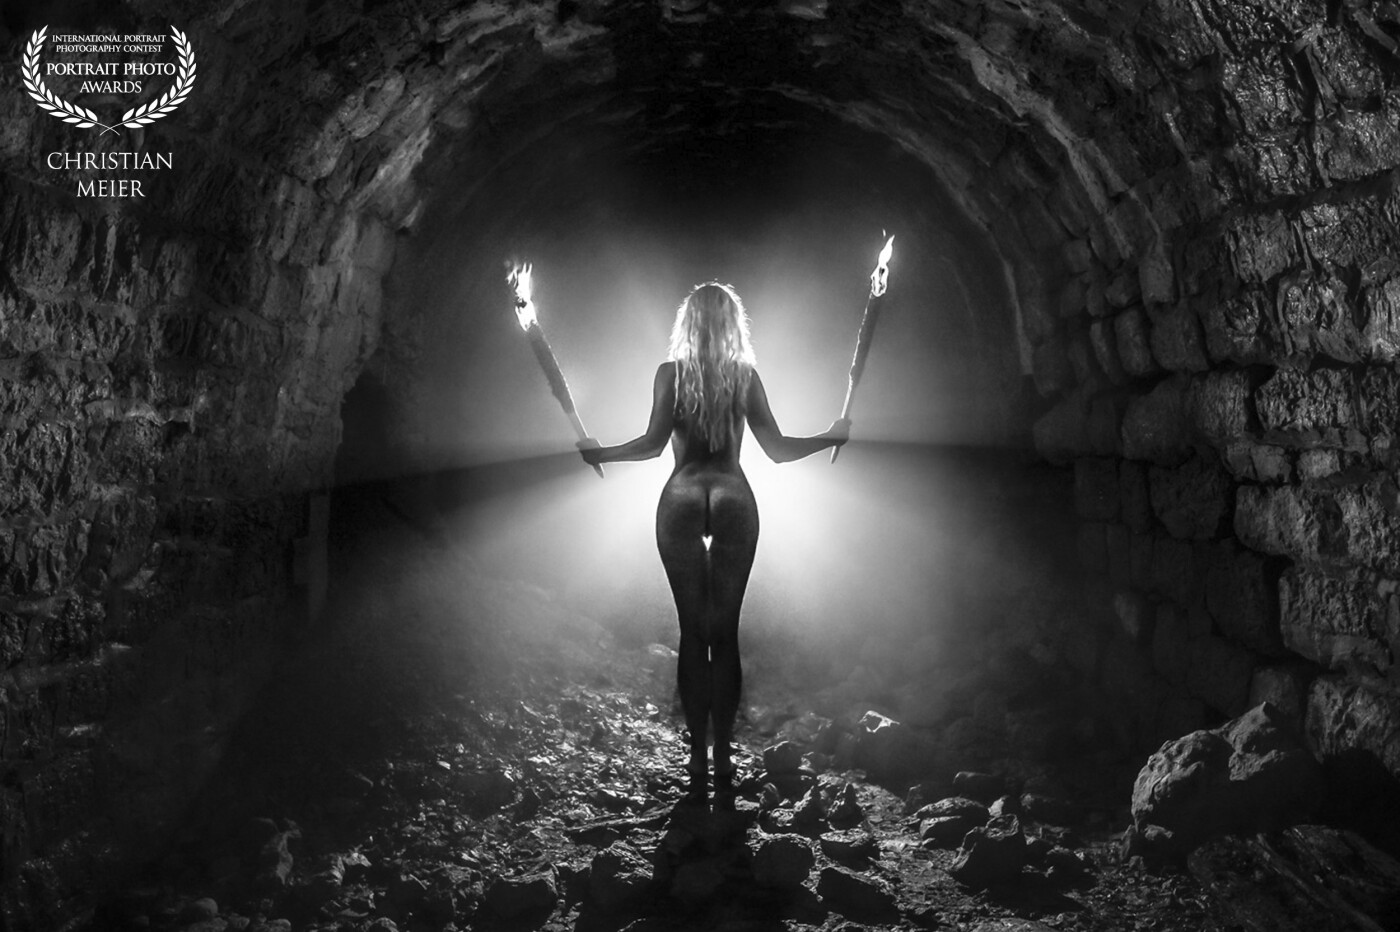 It is dark, damp and cold in the old, half-collapsed mine tunnel.<br />
The light only comes from the two self-made torches and the miner's lamp in front of the model.<br />
The "fog" is a product of my not quite professional torches. ;)<br />
<br />
Who finds the heart?<br />
<br />
Model: Rachelle Utzinger